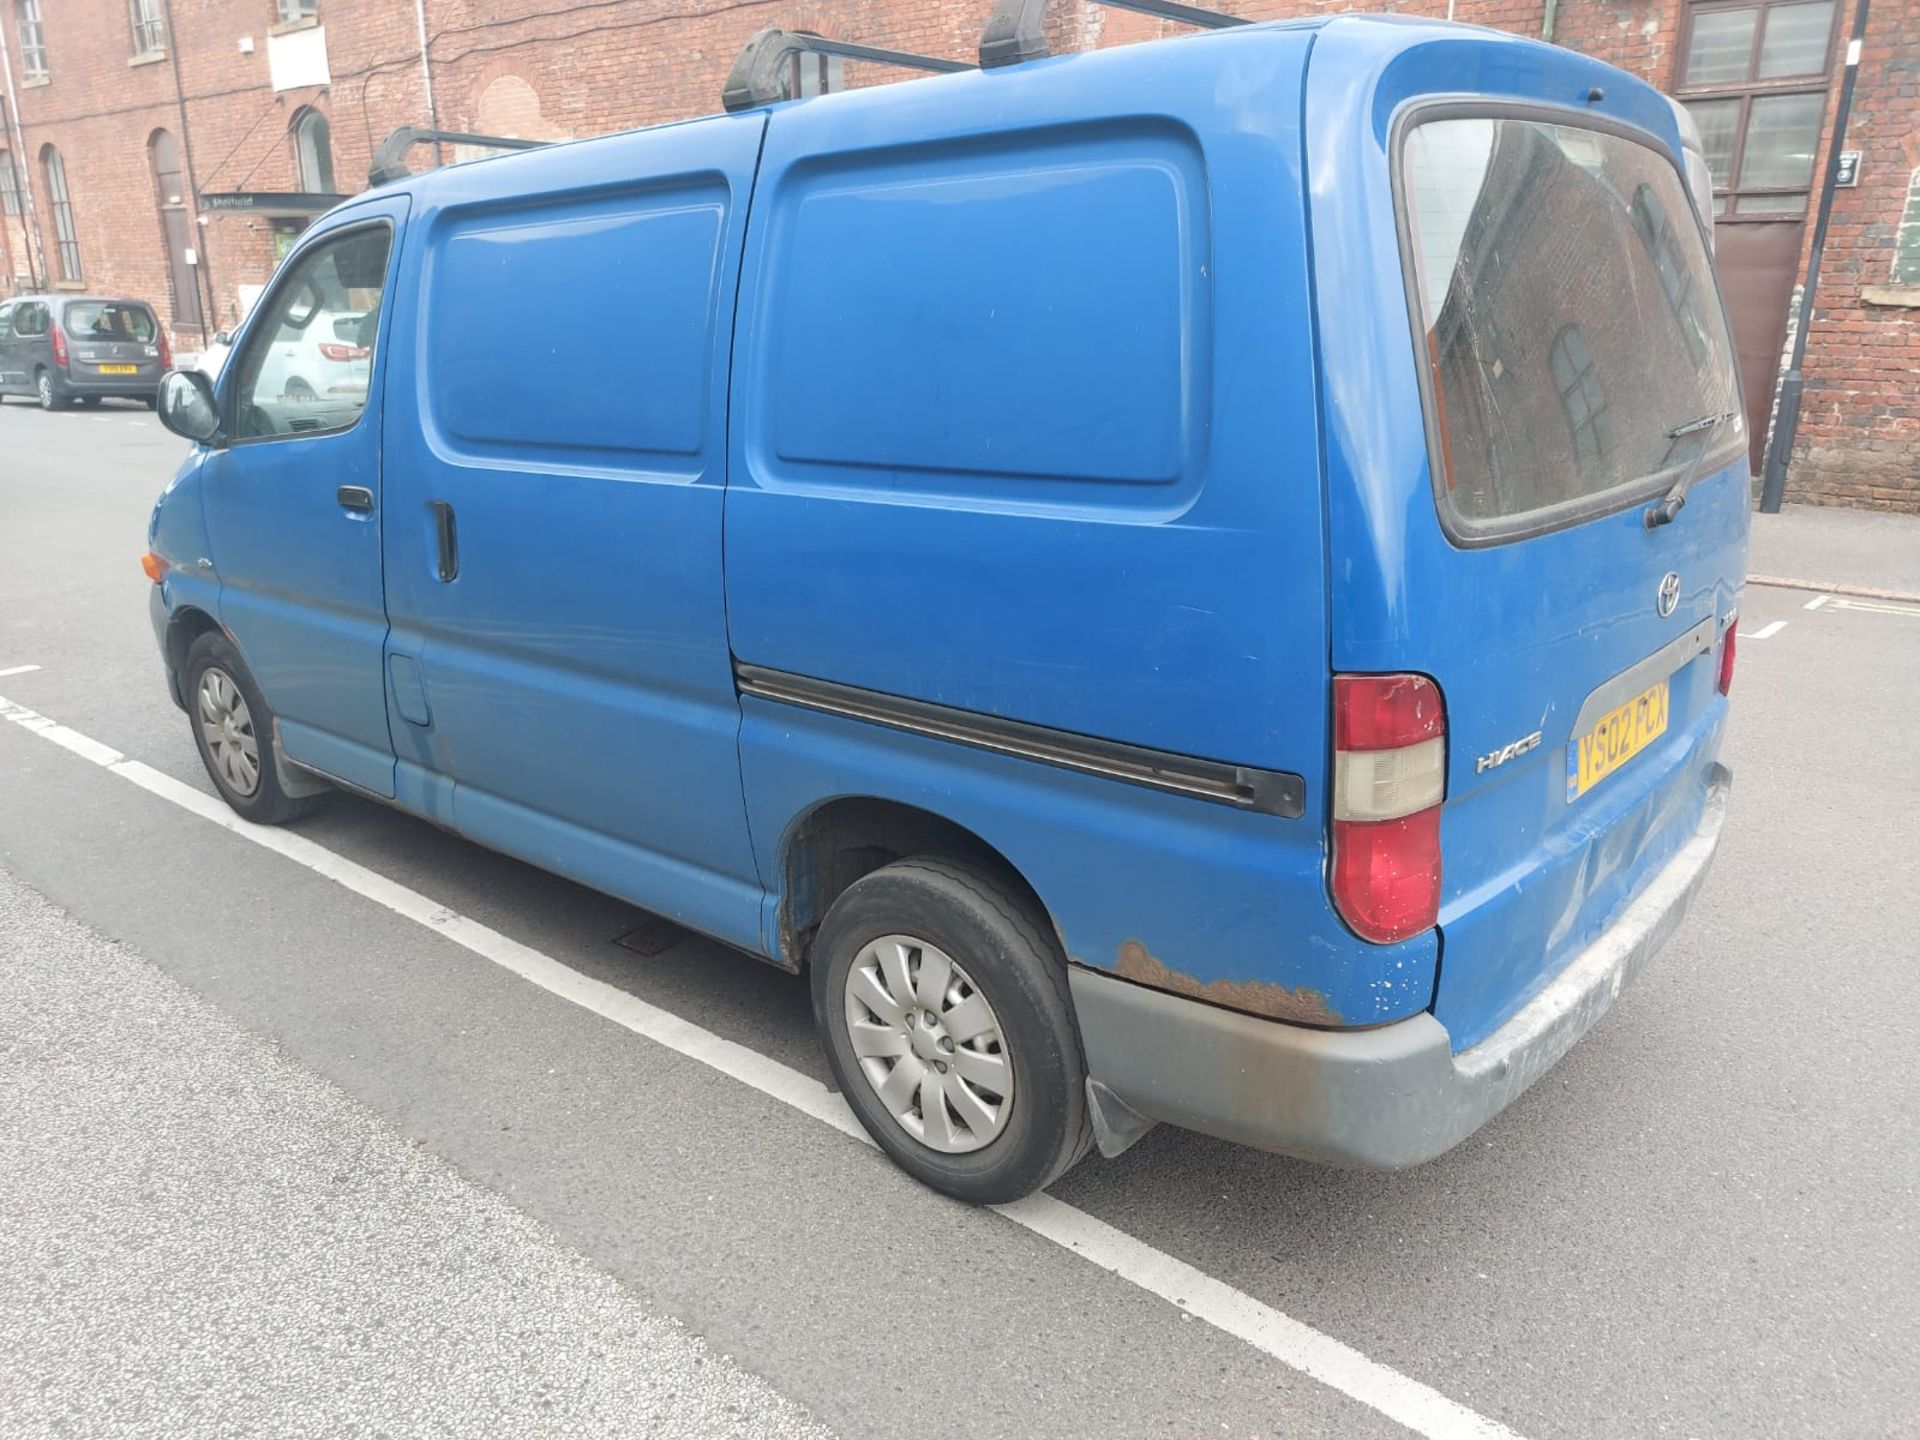 YS02 PCX TOYOTA HIACE 280 GS VAN 2494CC DIESEL FIRST REGISTERED 28.06.2002. MILEAGE: 169,625 - Image 4 of 5